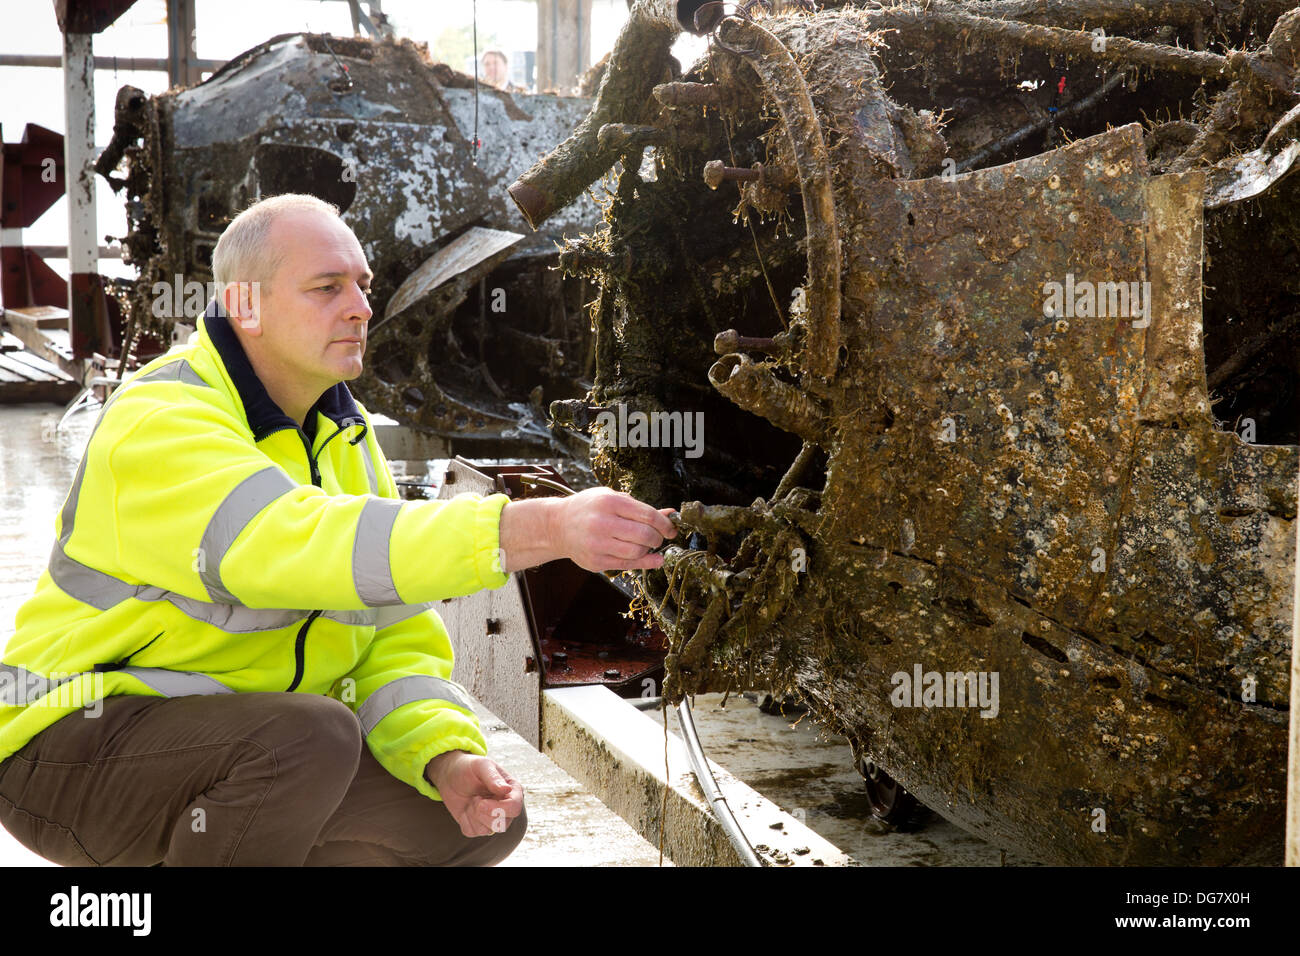 The remains of the Dornier Do-17 German Bomber being preserved at Cosford Air Museum. Pictured, see description. Stock Photo